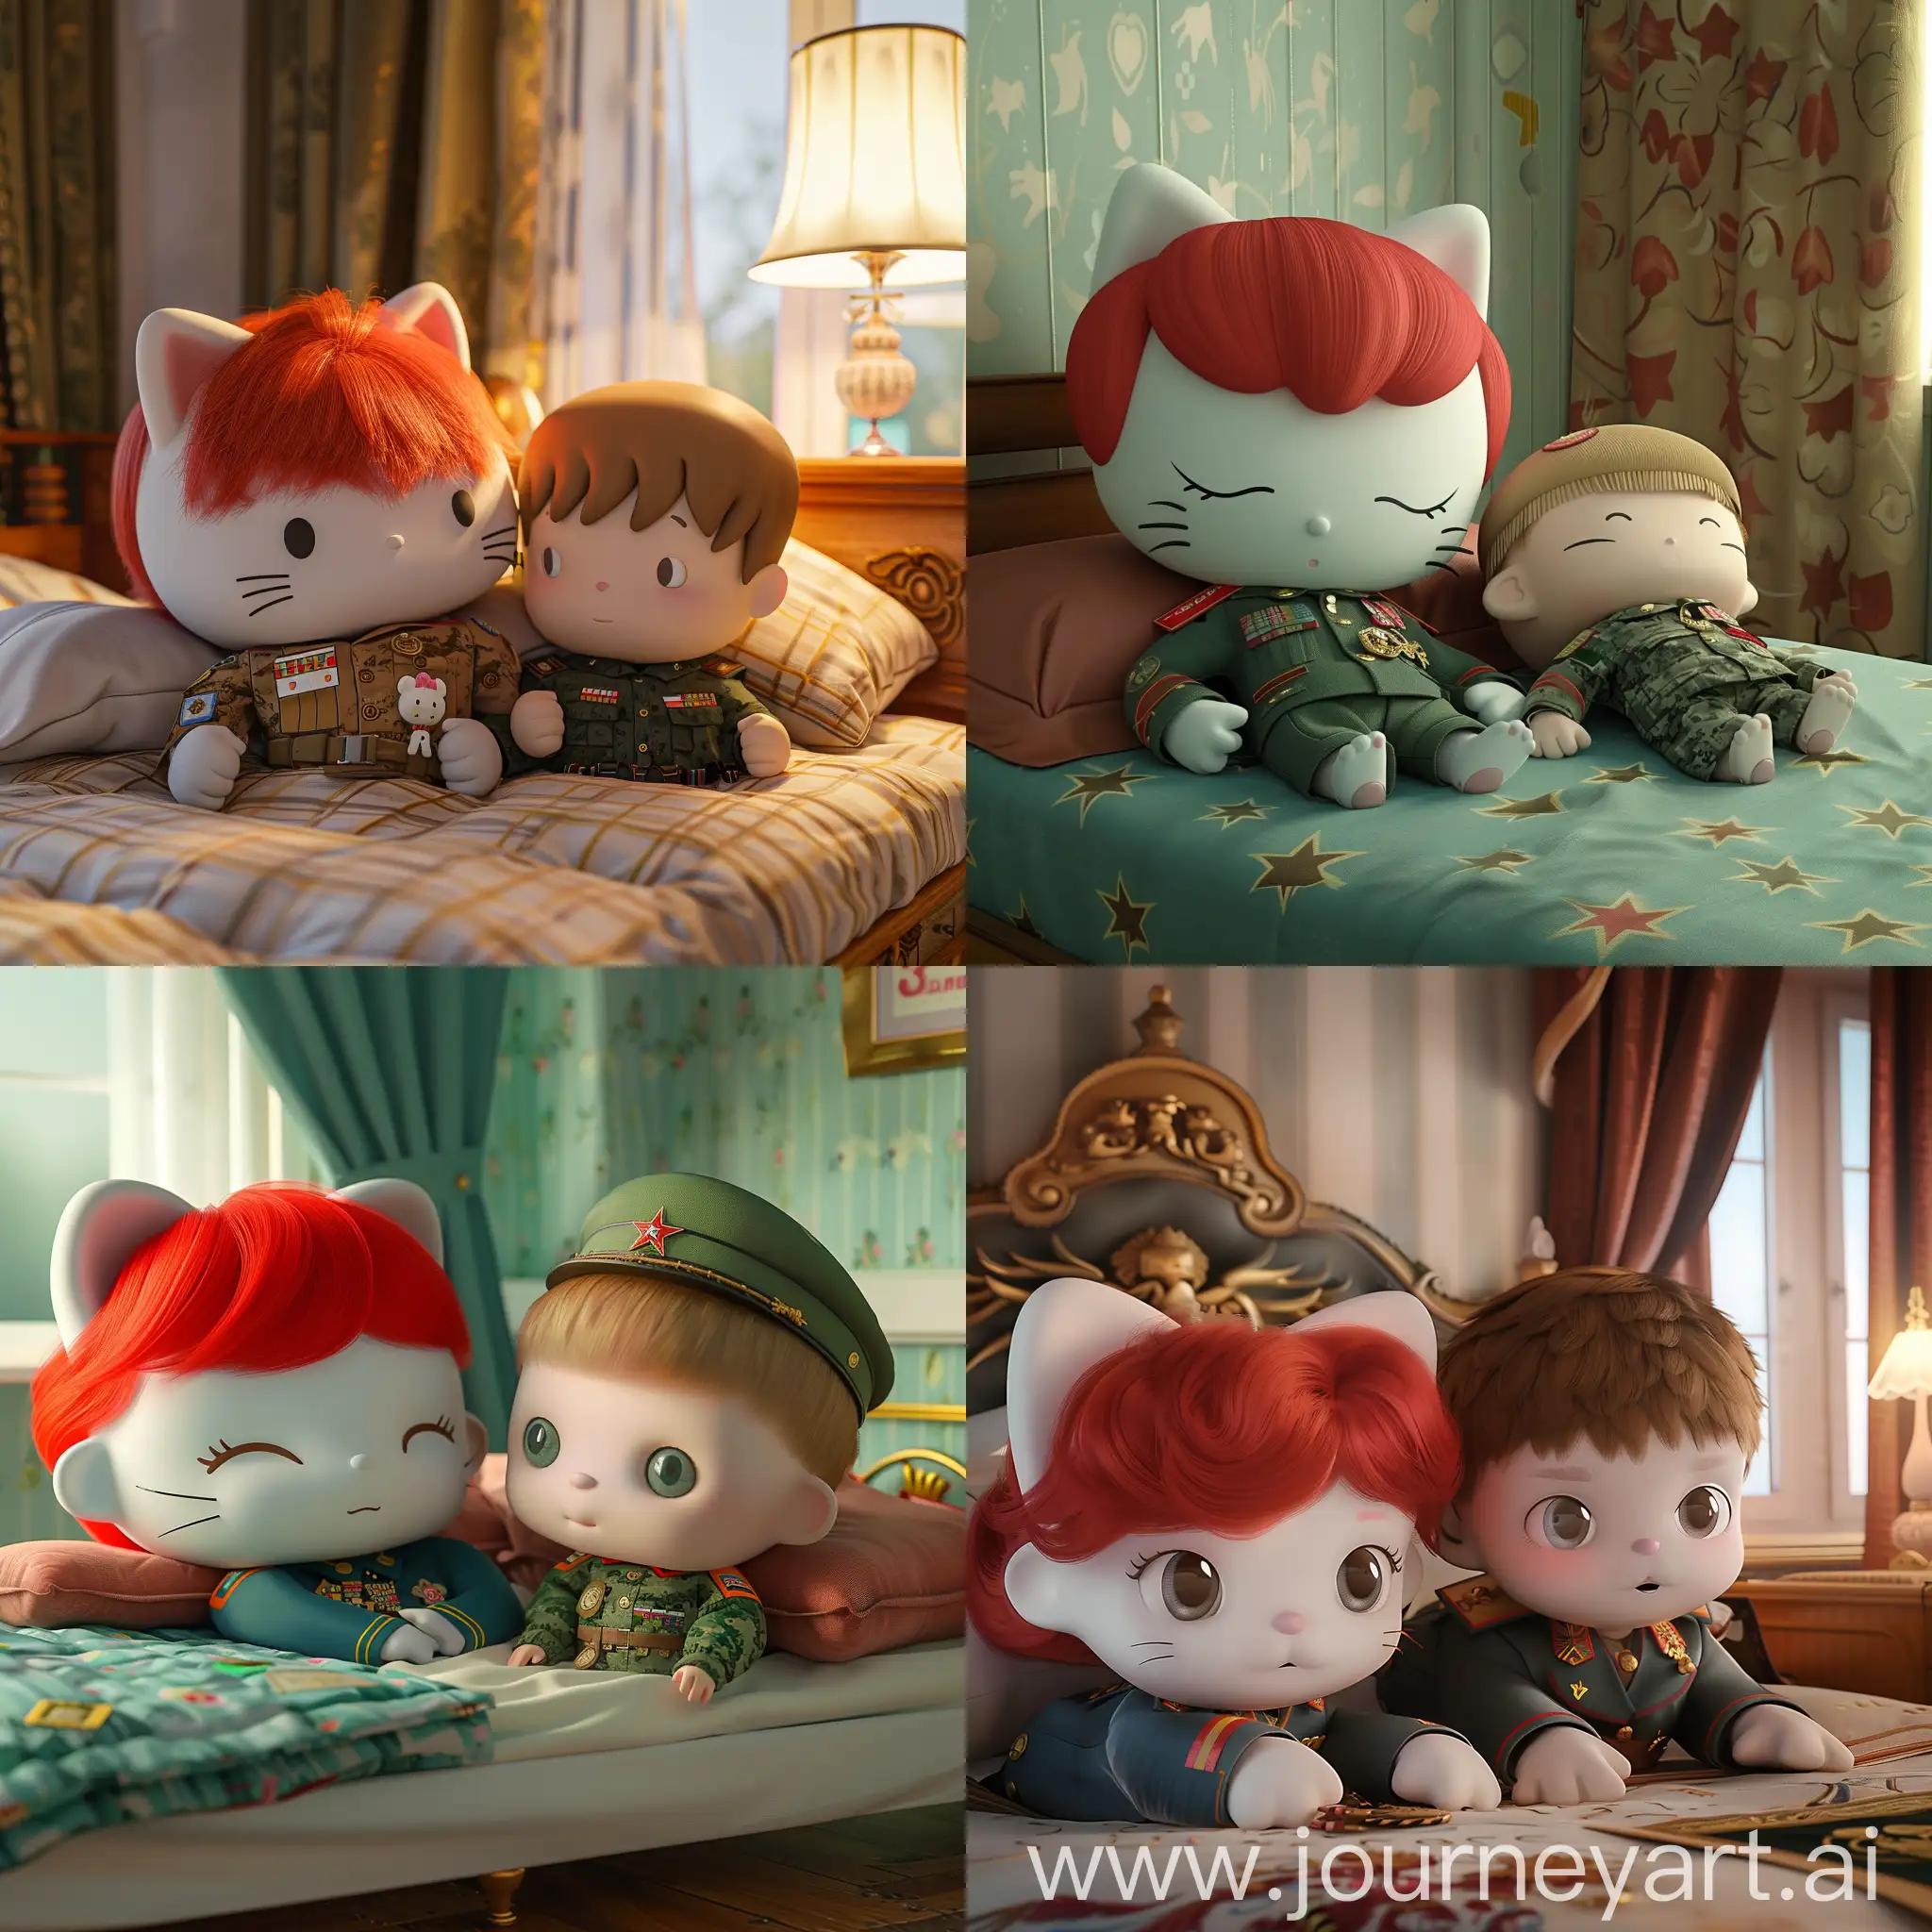 Cute-Hello-Kitty-Duo-RedHaired-Hello-Kitty-and-Military-Boy-Kitty-on-Bed